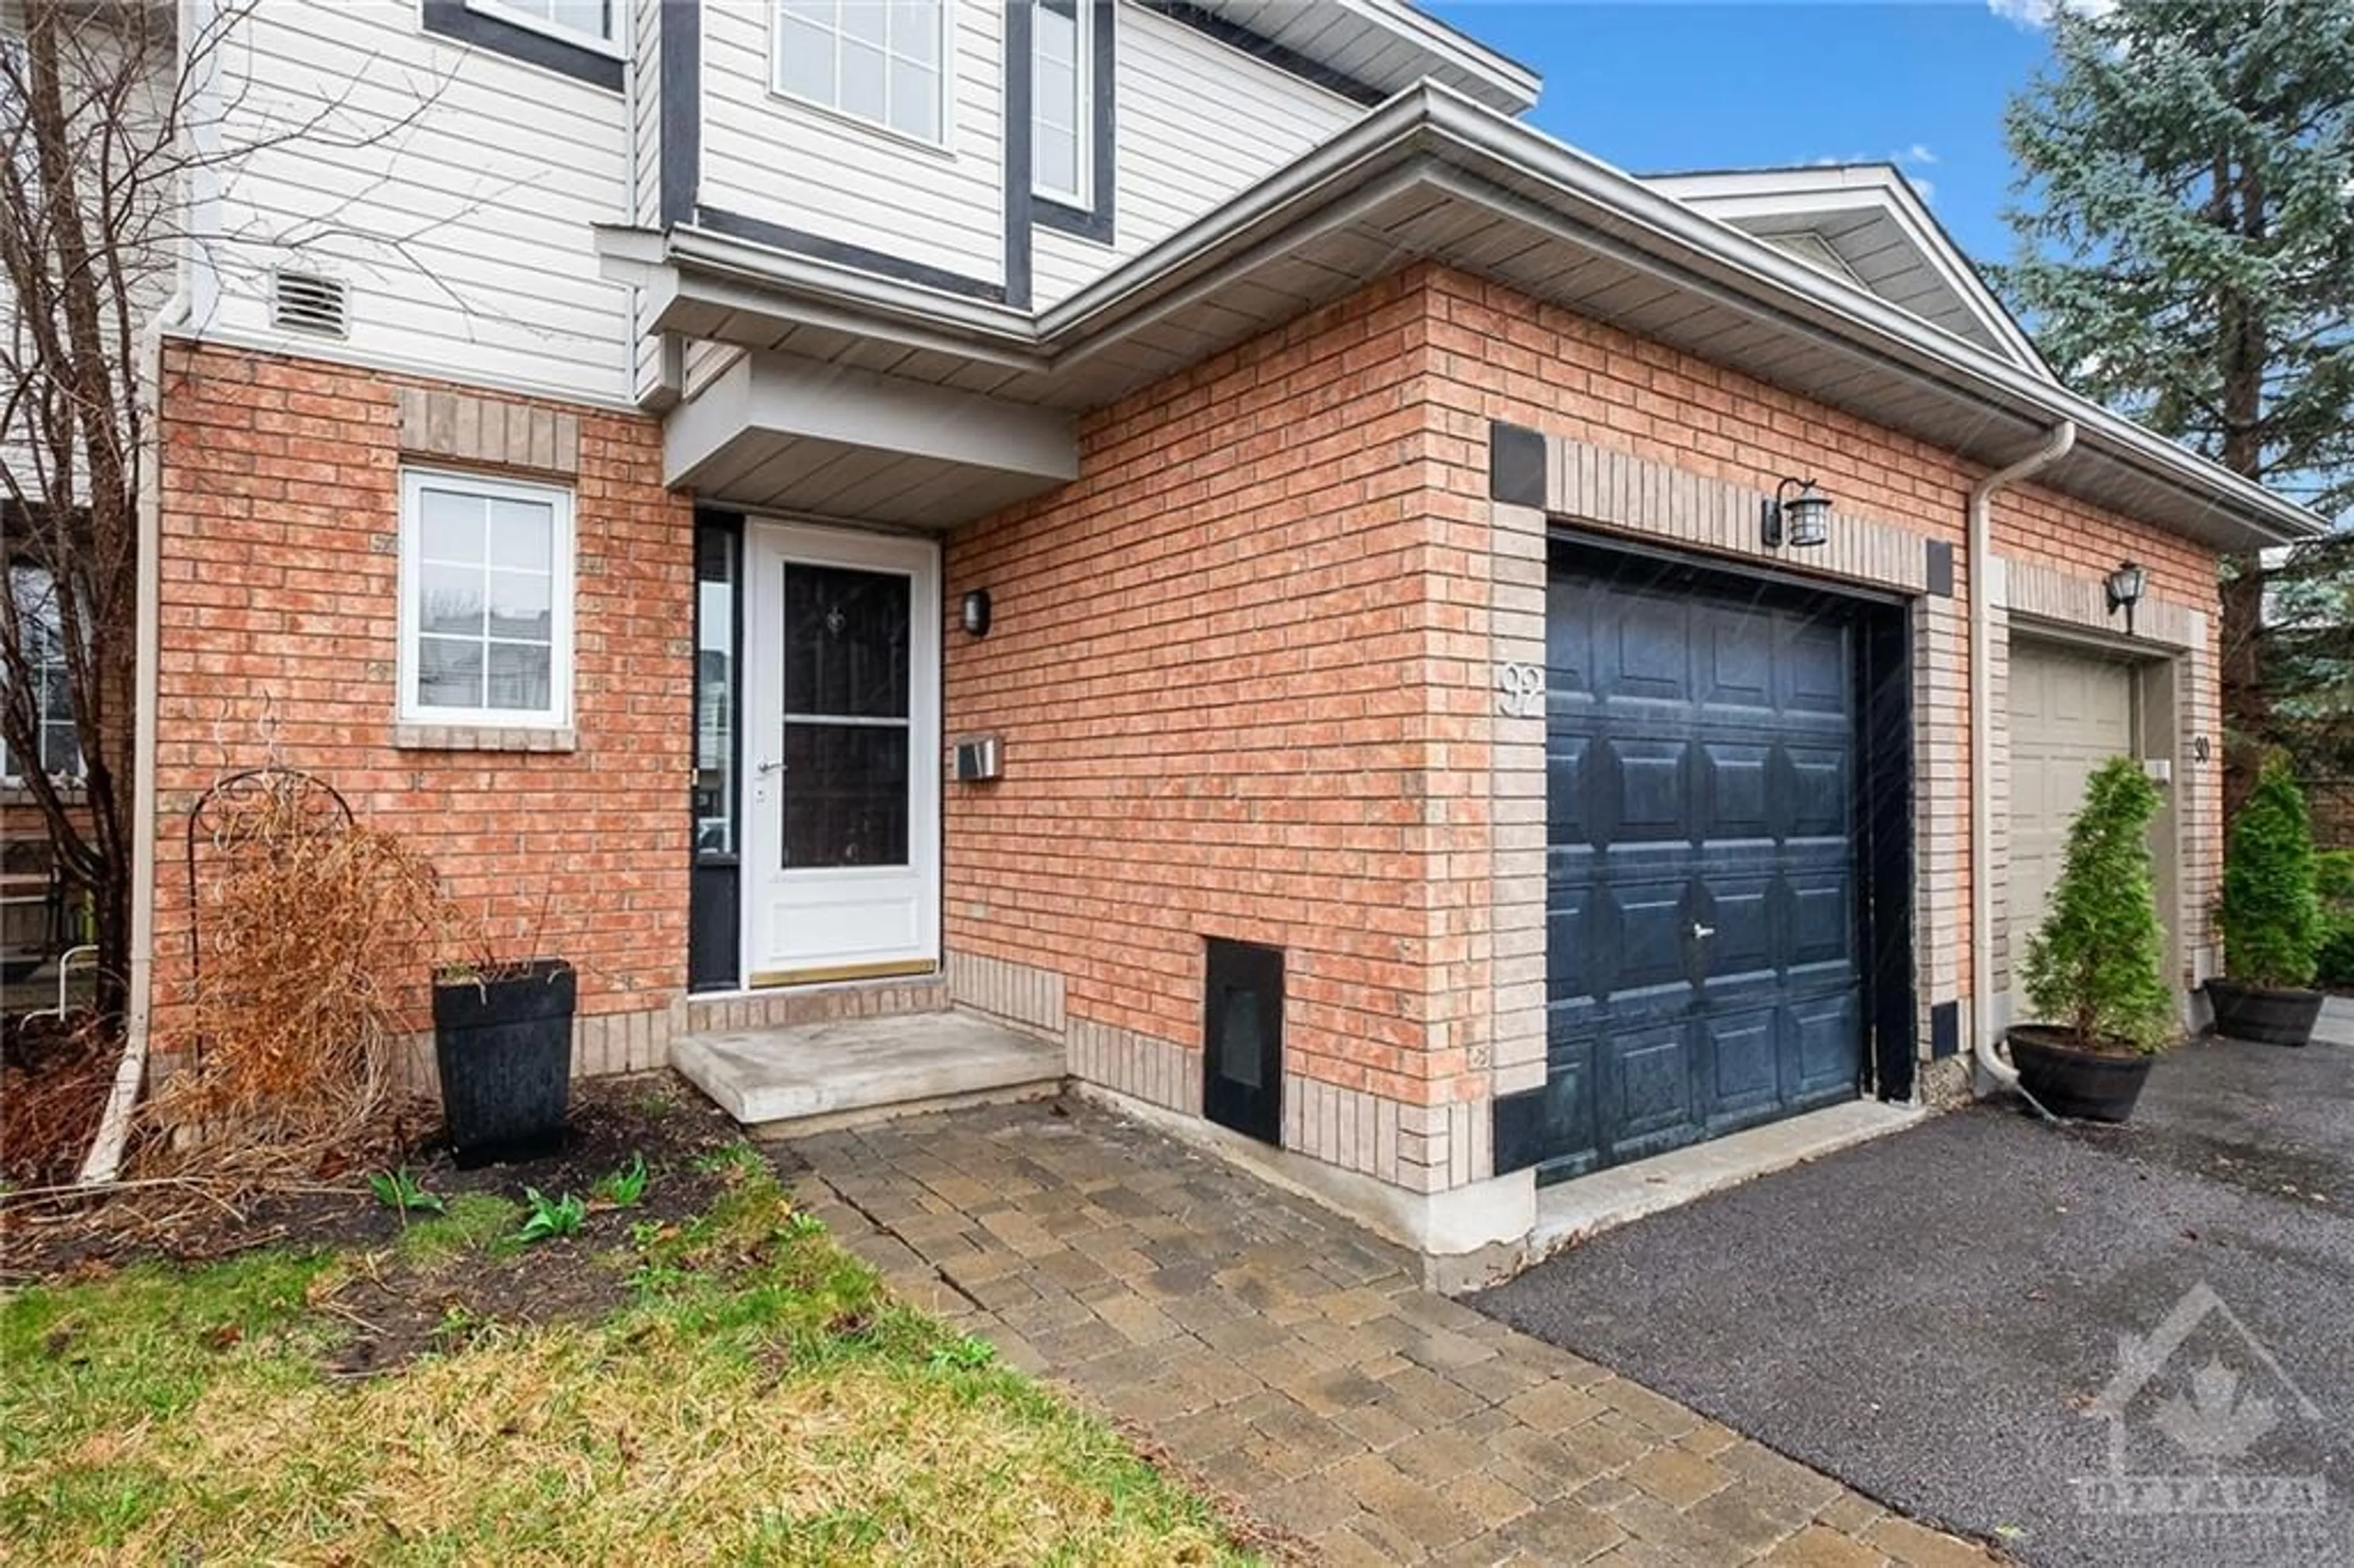 Home with brick exterior material for 92 COLLEGE Cir, Ottawa Ontario K1K 4R8